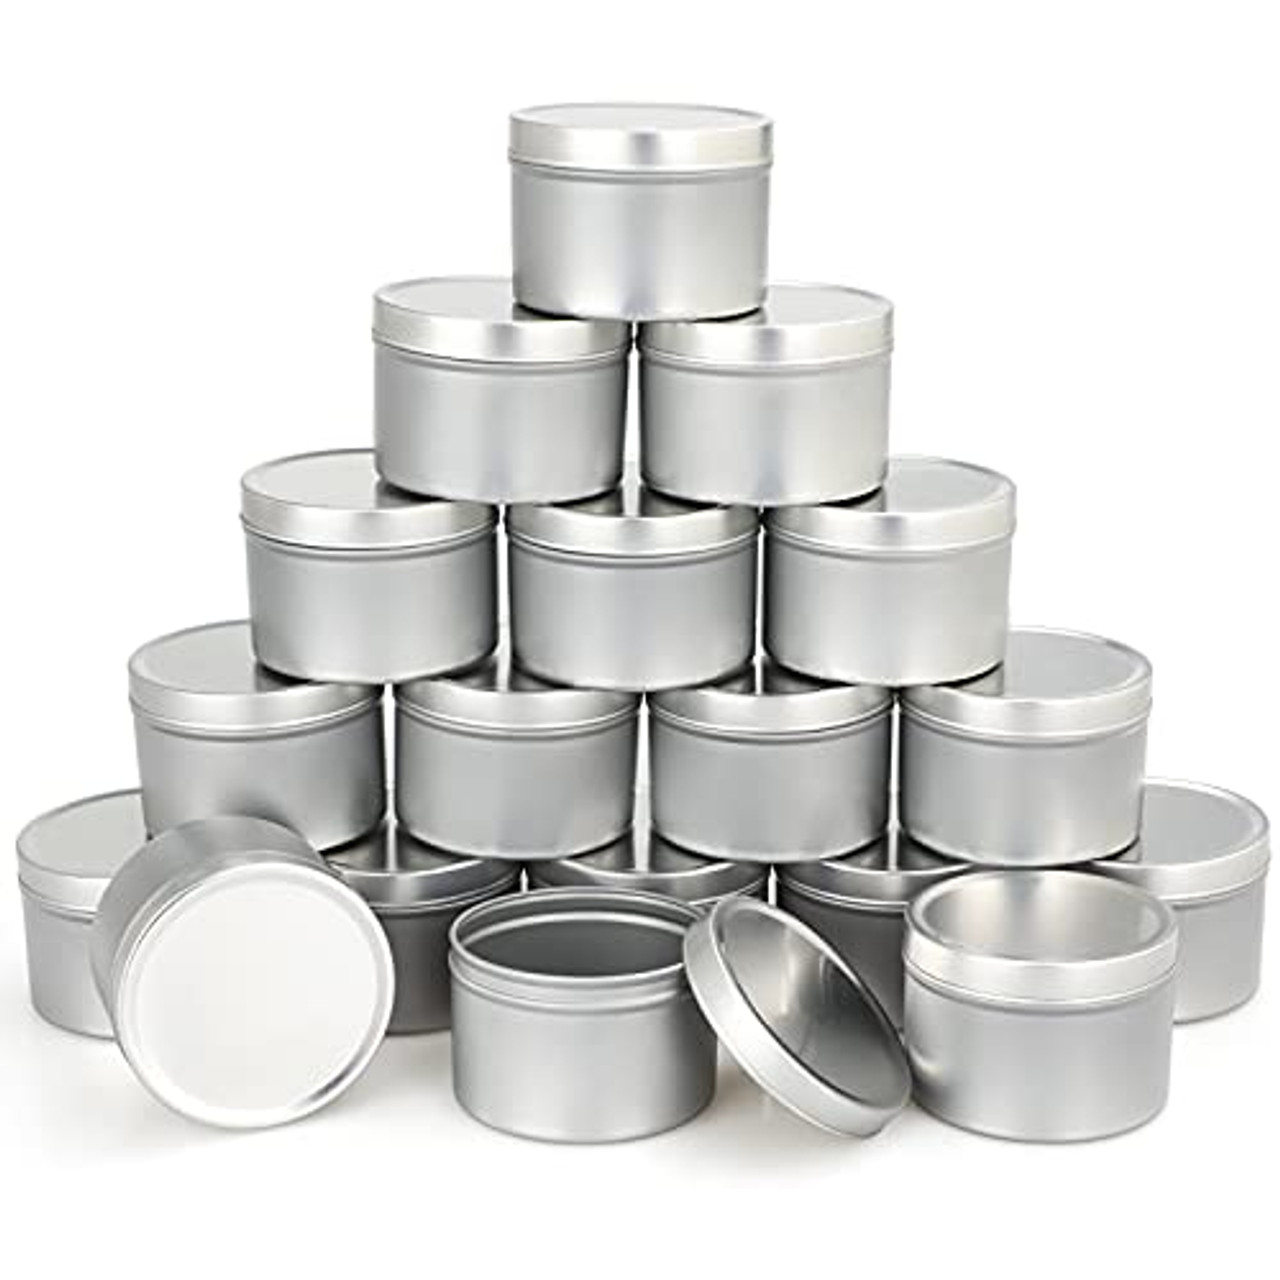 8 oz Silver Candle Tin with Feet, 12 Pack